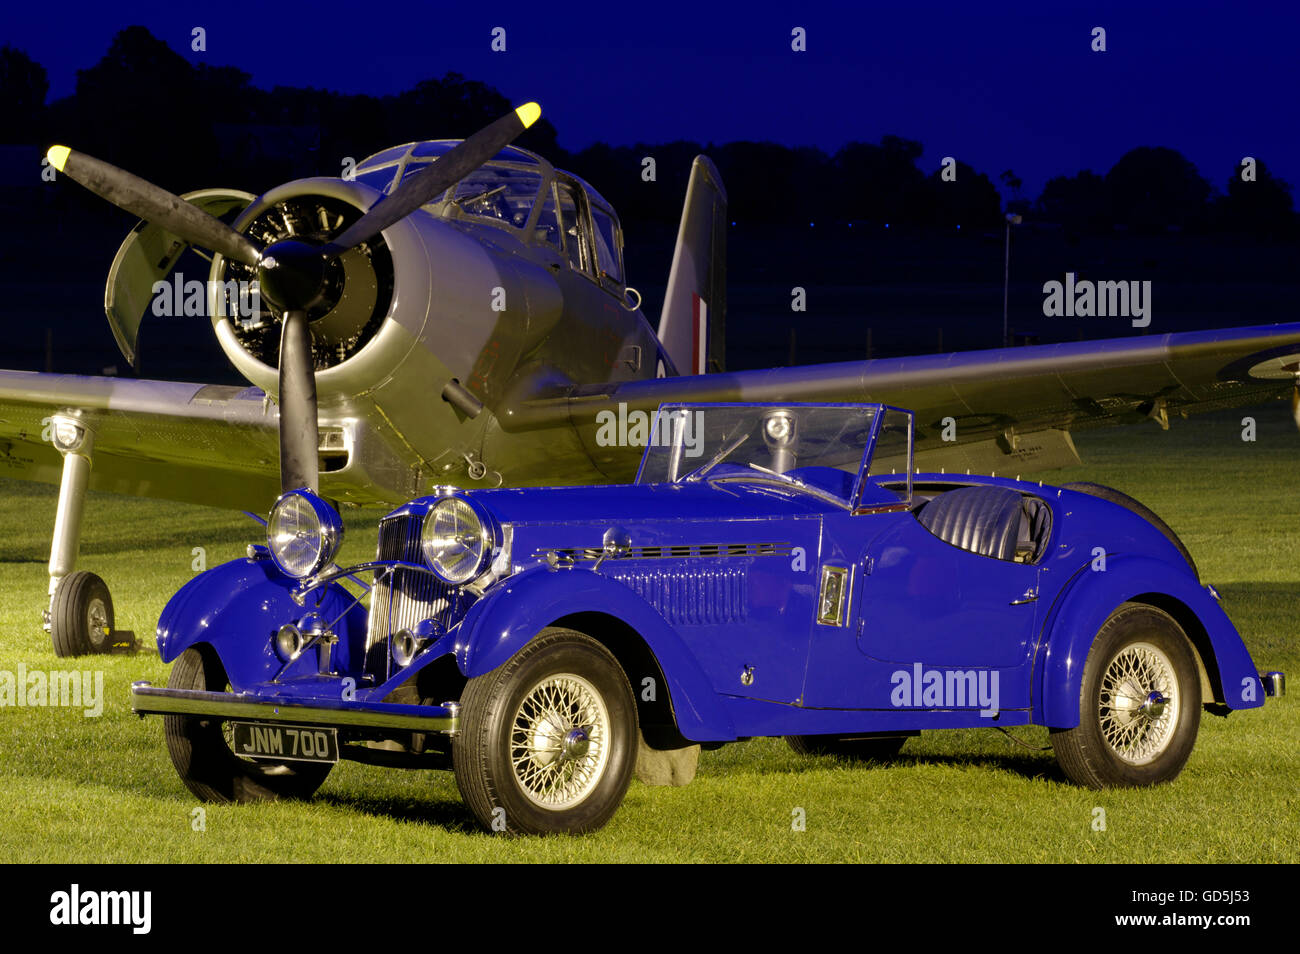 Percival Provost XF603, G-KAPW, at night, Shuttleworth Collection Stock Photo